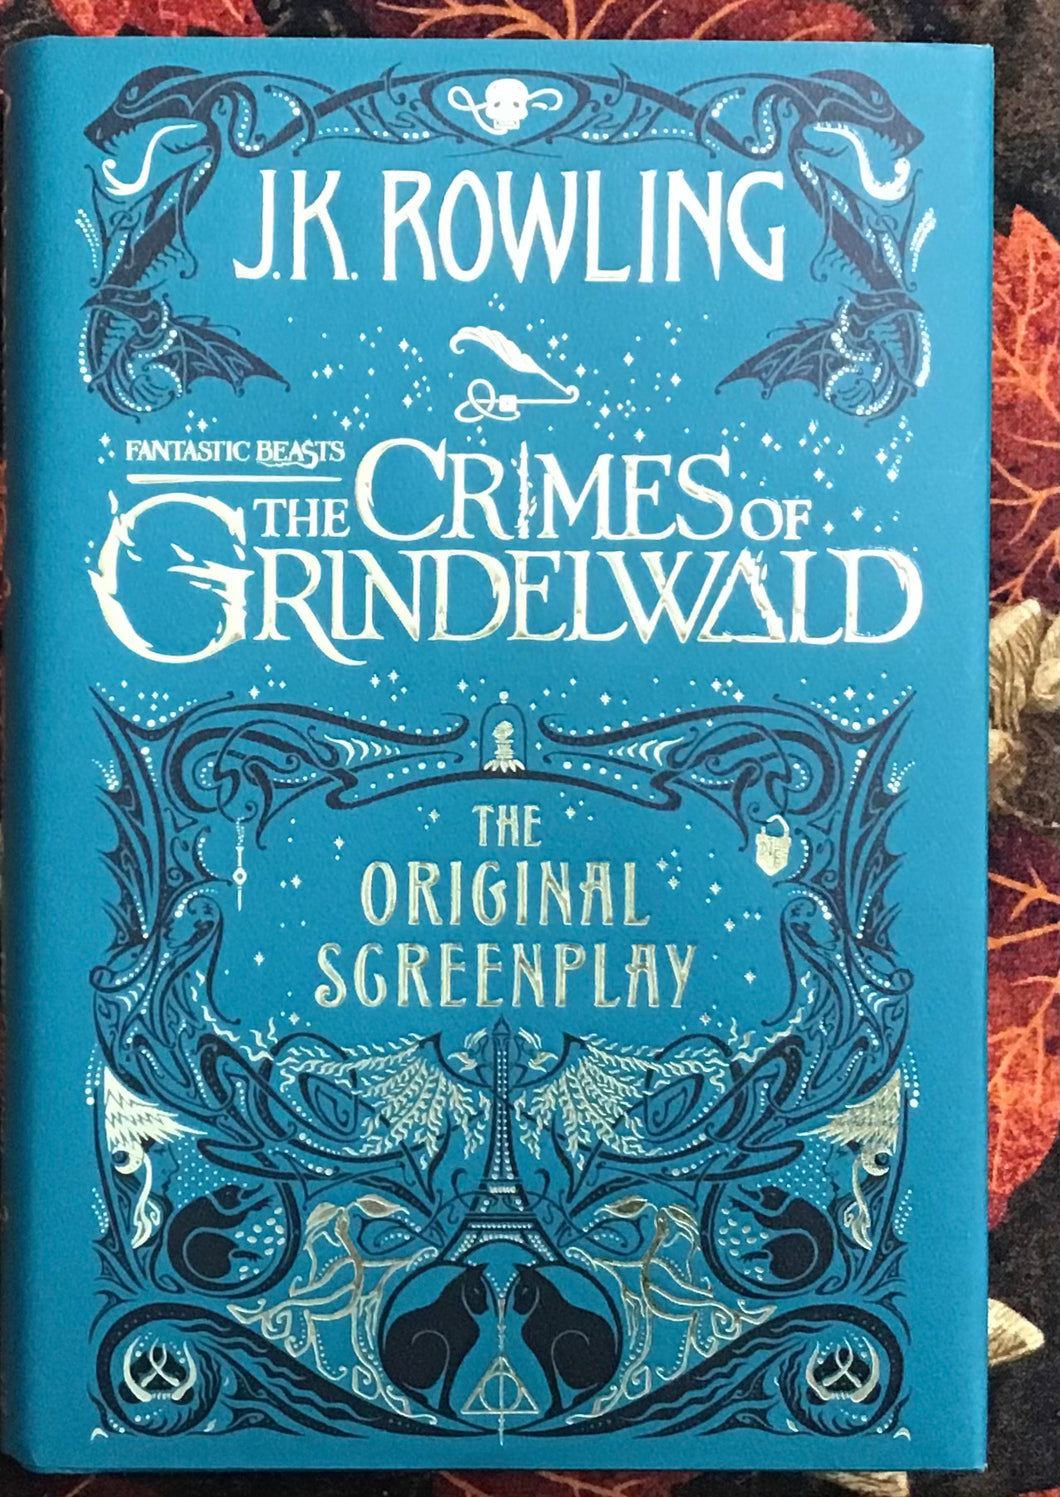 The Crimes of Grindelwald, by JK Rowling